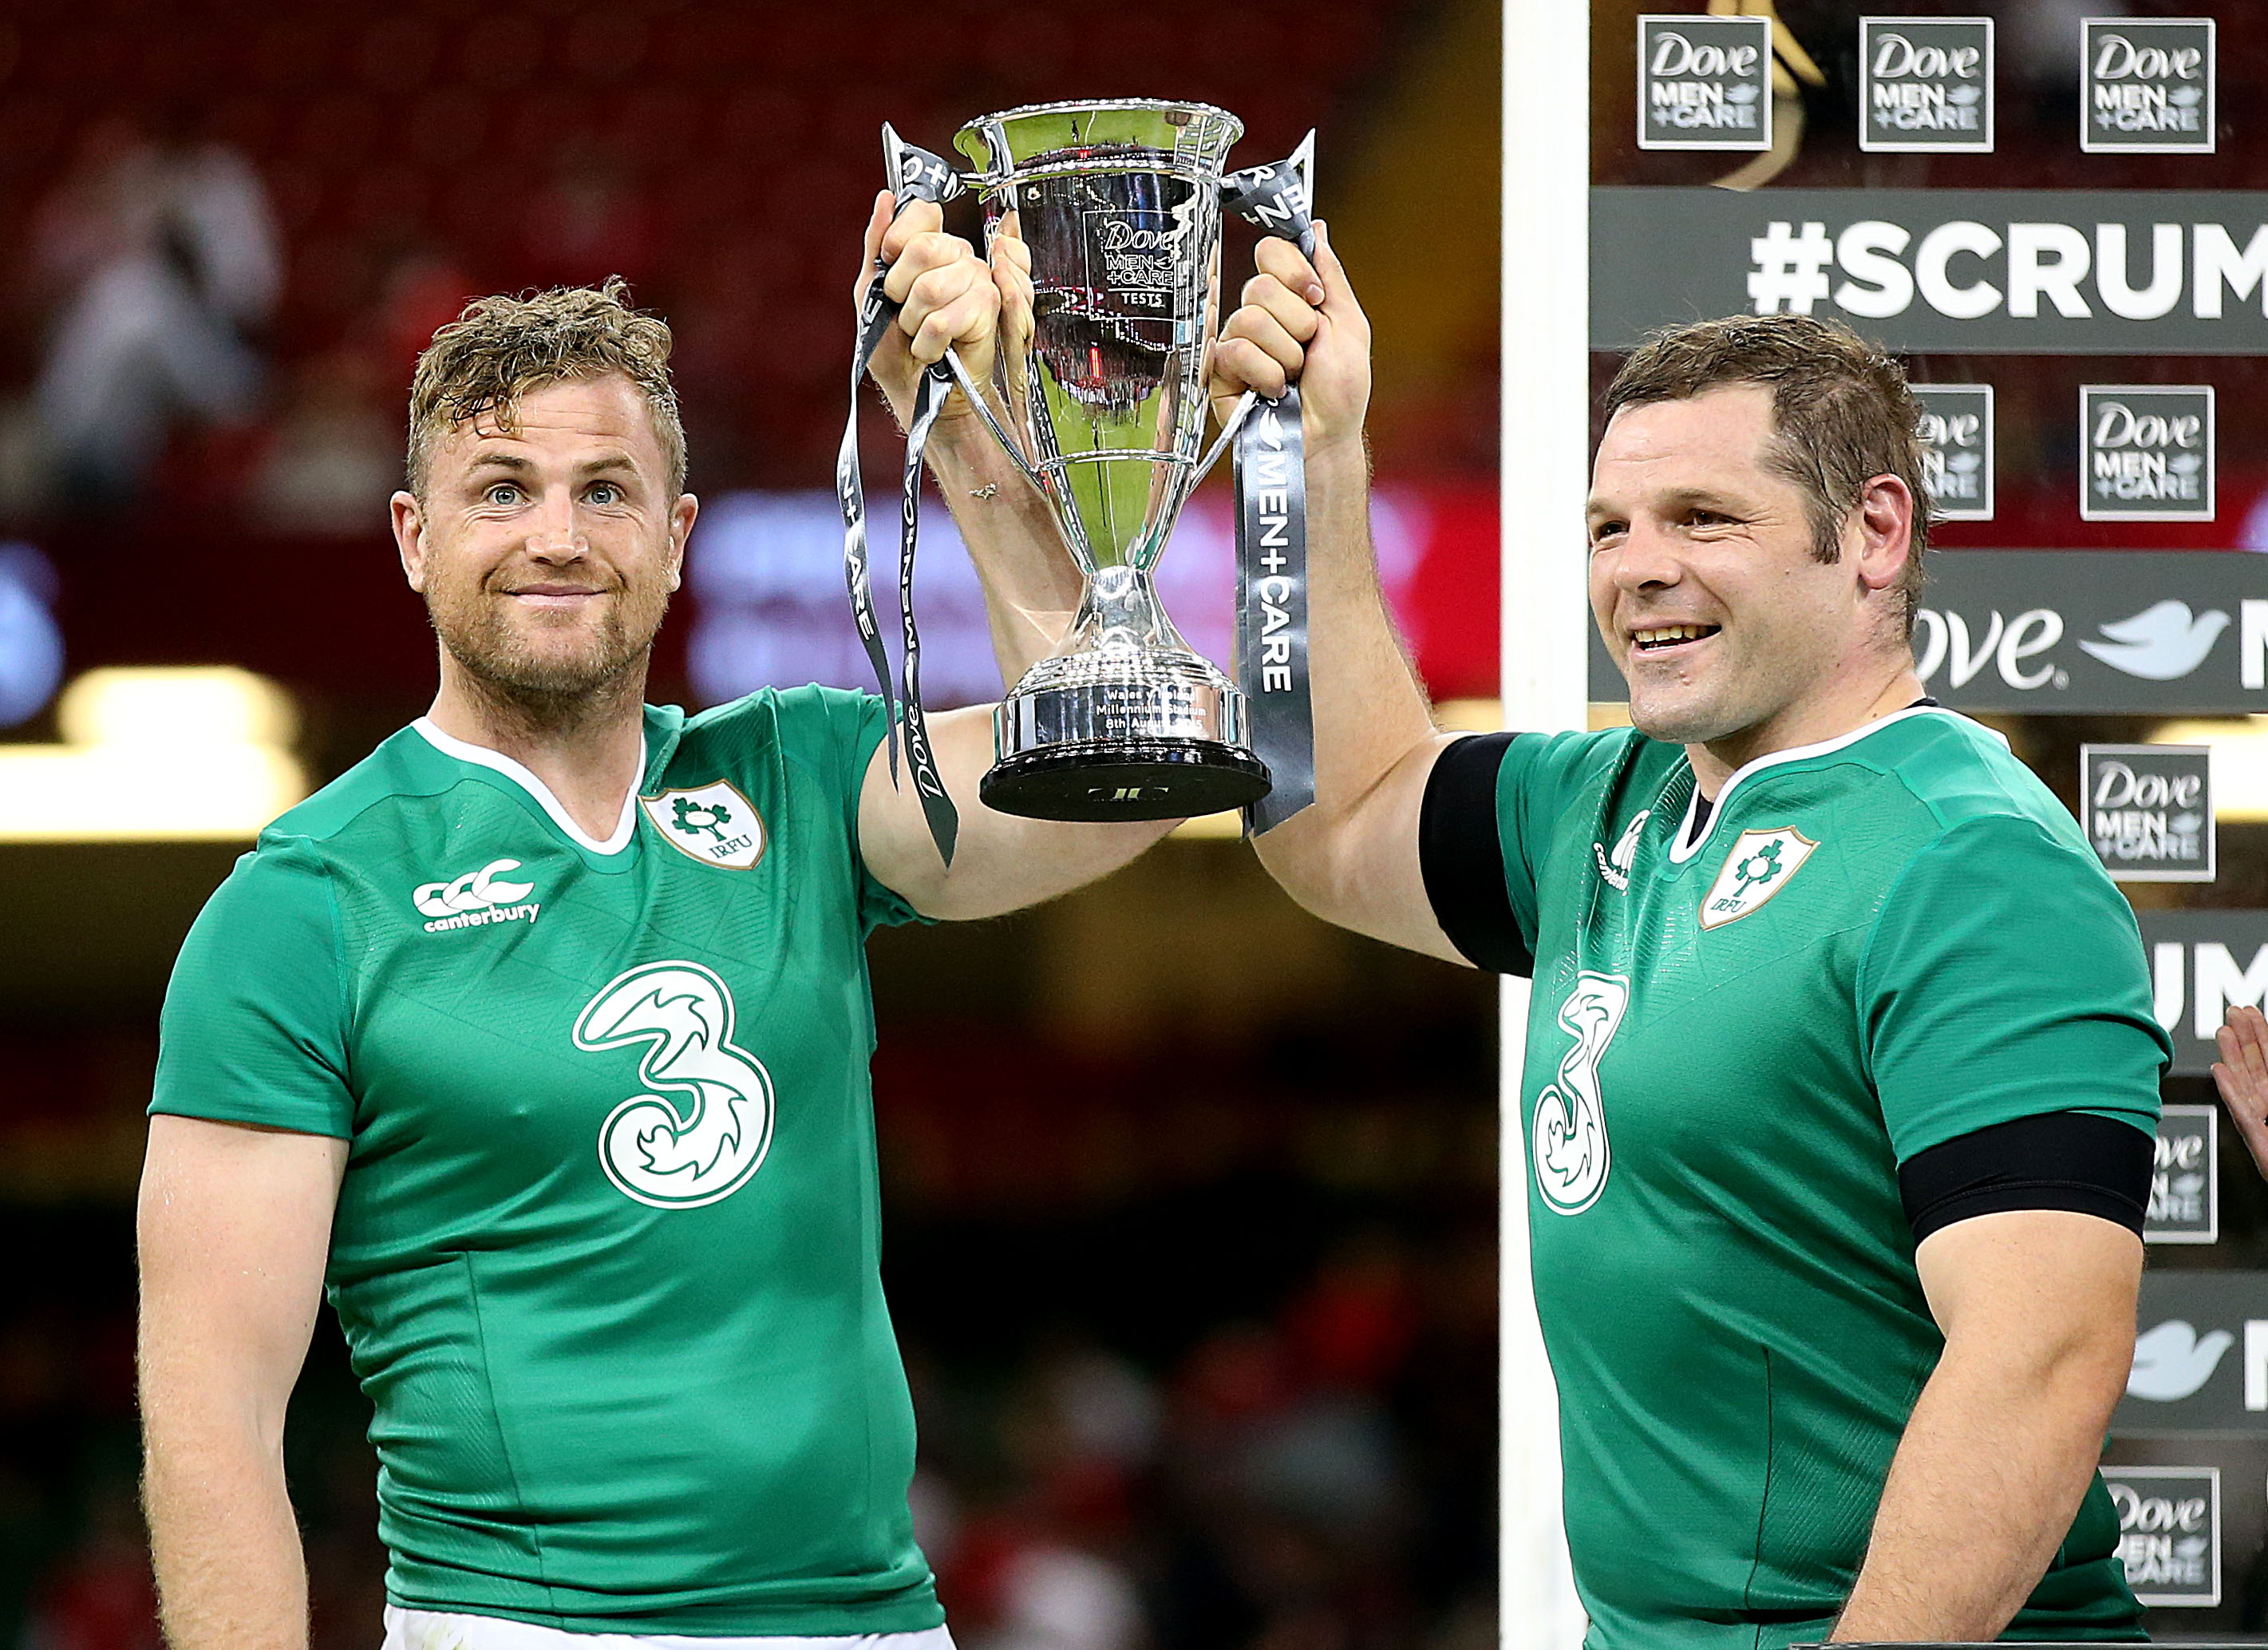 2015 Rugby World Cup Warm-Up Match, Millennium Stadium, Cardiff, Wales 8/8/2015 Wales vs Ireland Ireland's Jamie Heaslip and Mike Ross lift the trophy Mandatory Credit ©INPHO/Dan Sheridan